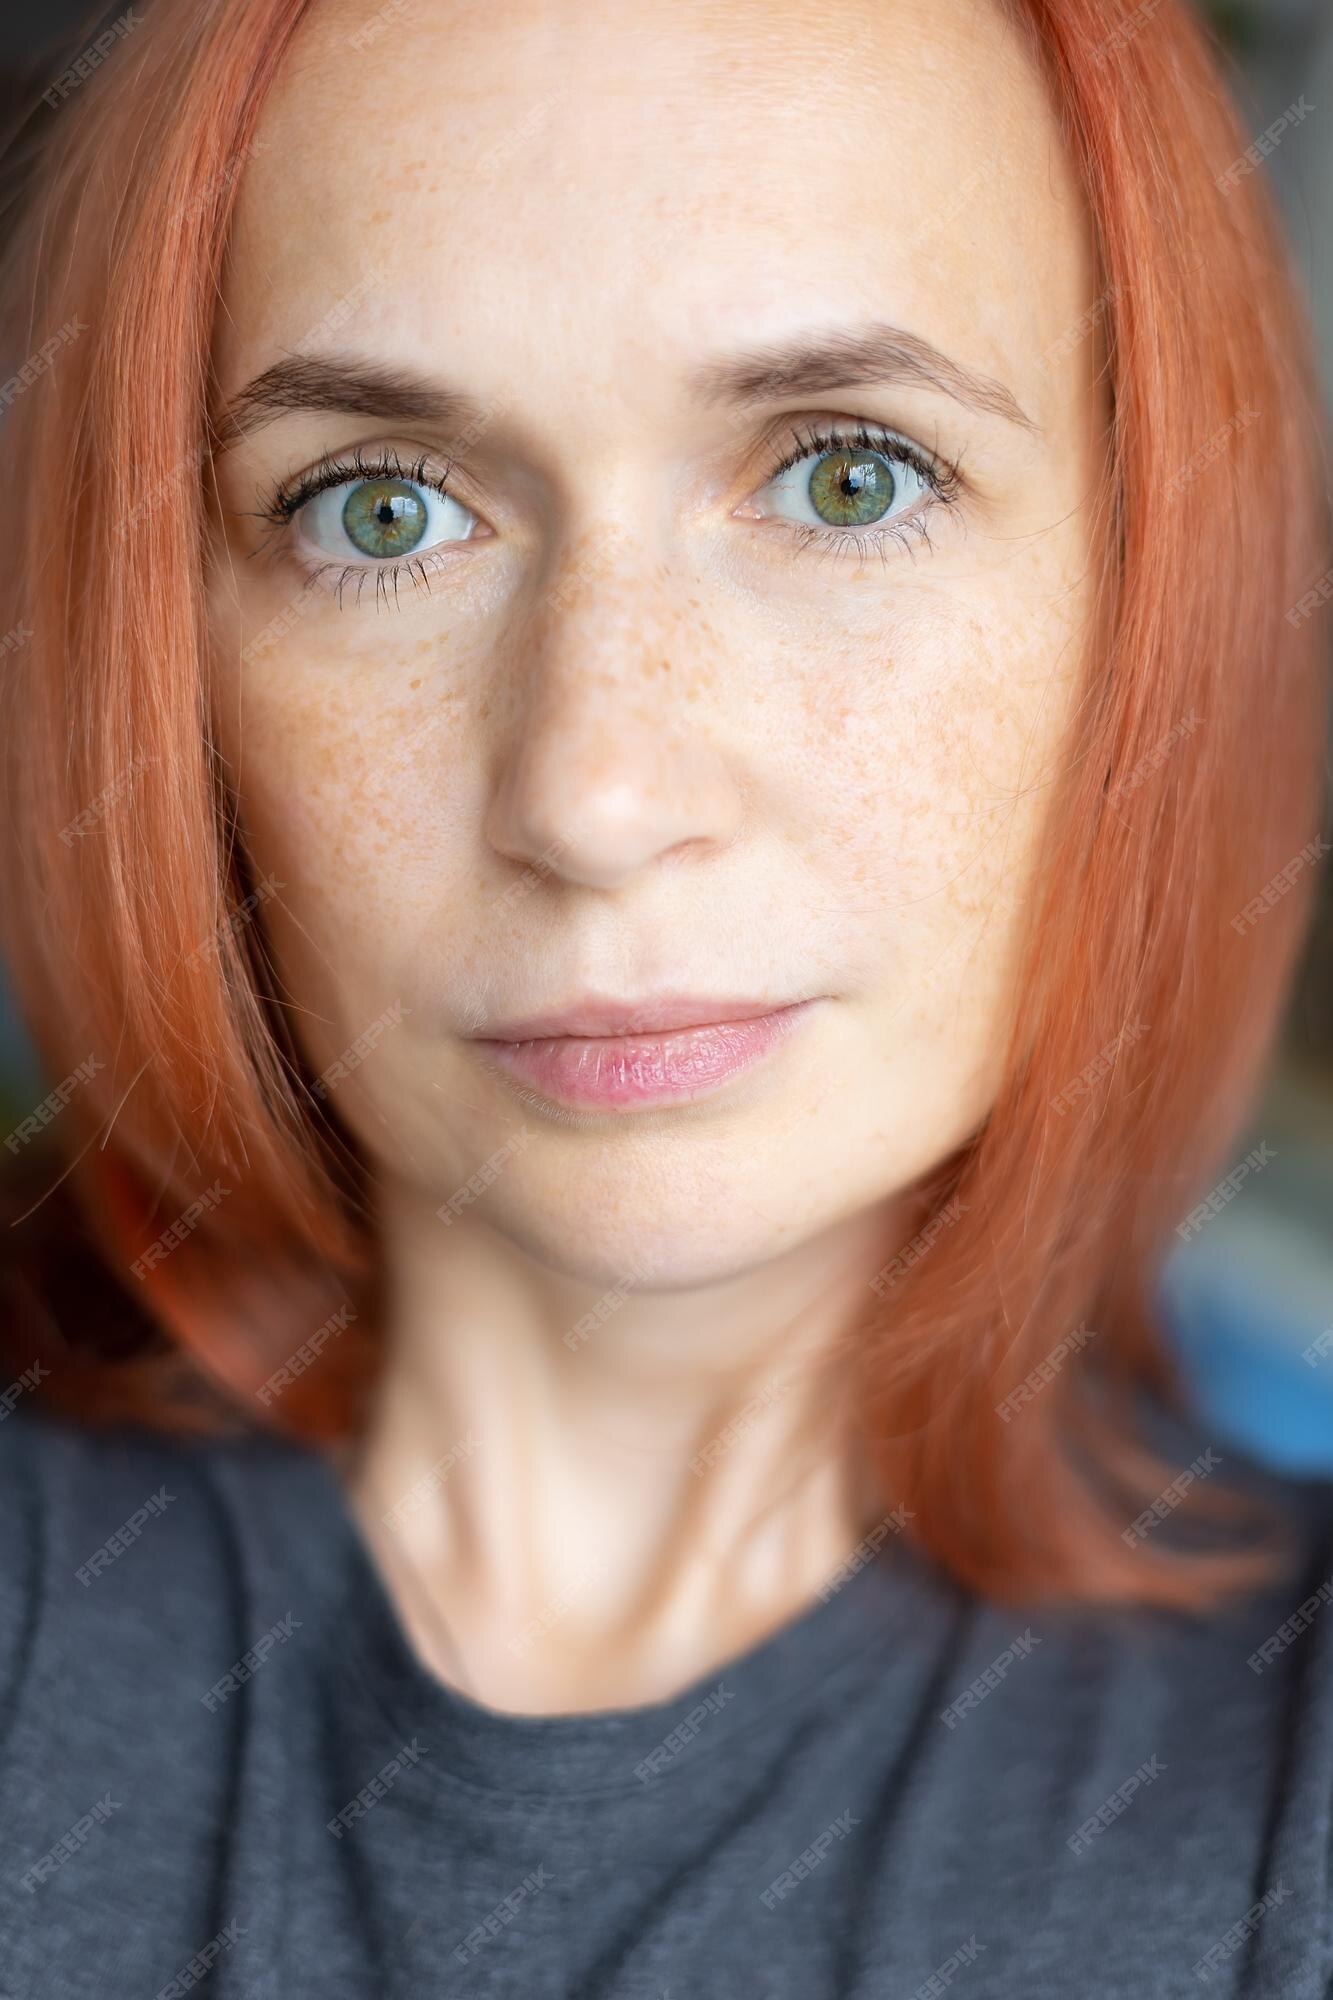 Premium Photo | Young pretty woman with red hair green eyes and freckles  looks carefully at the camera closeup selective focus